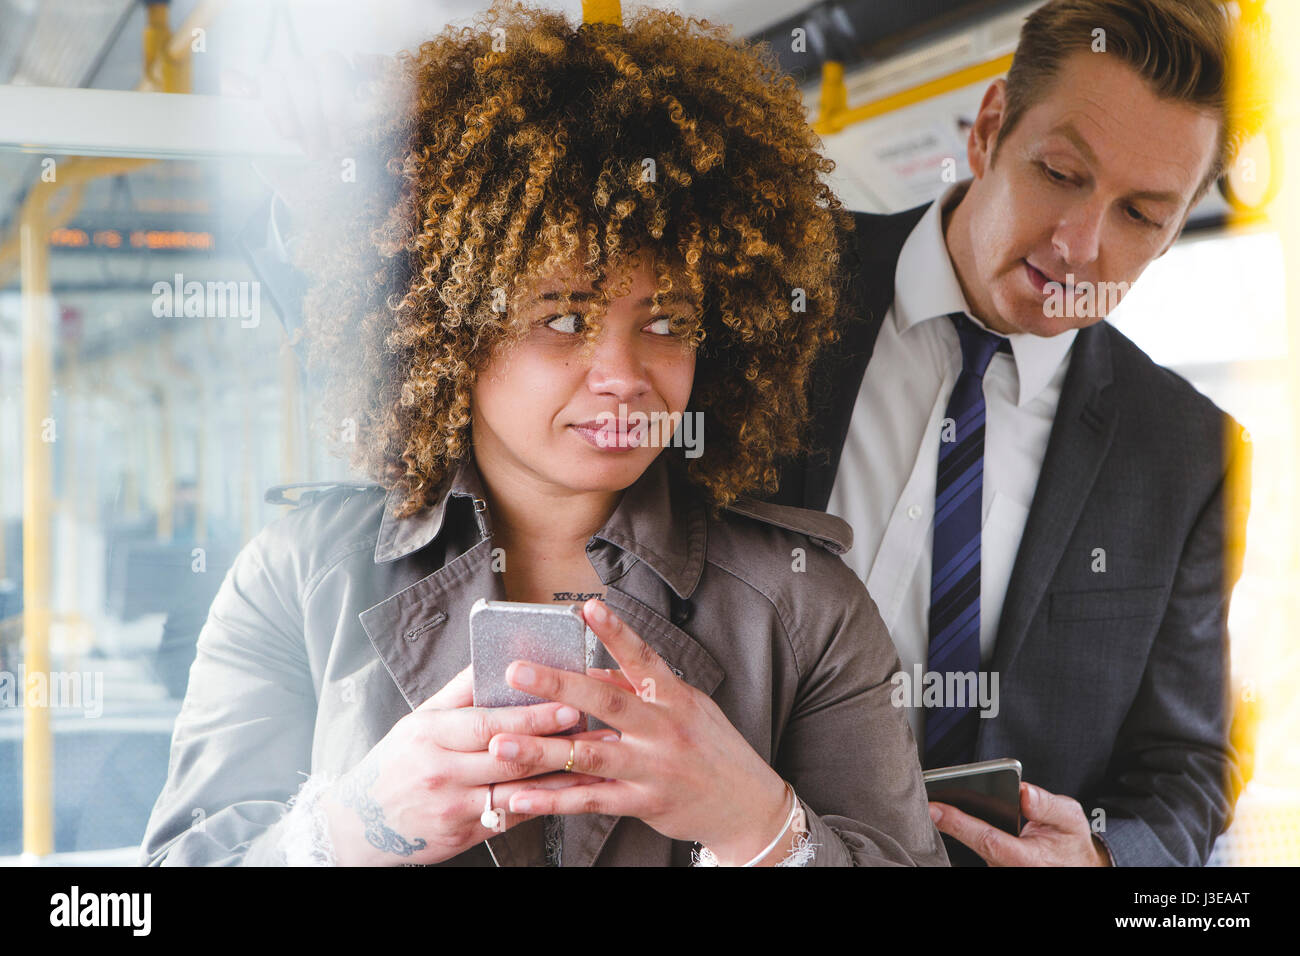 Man looking over a womans shoulder on the train at her phone screen. Stock Photo